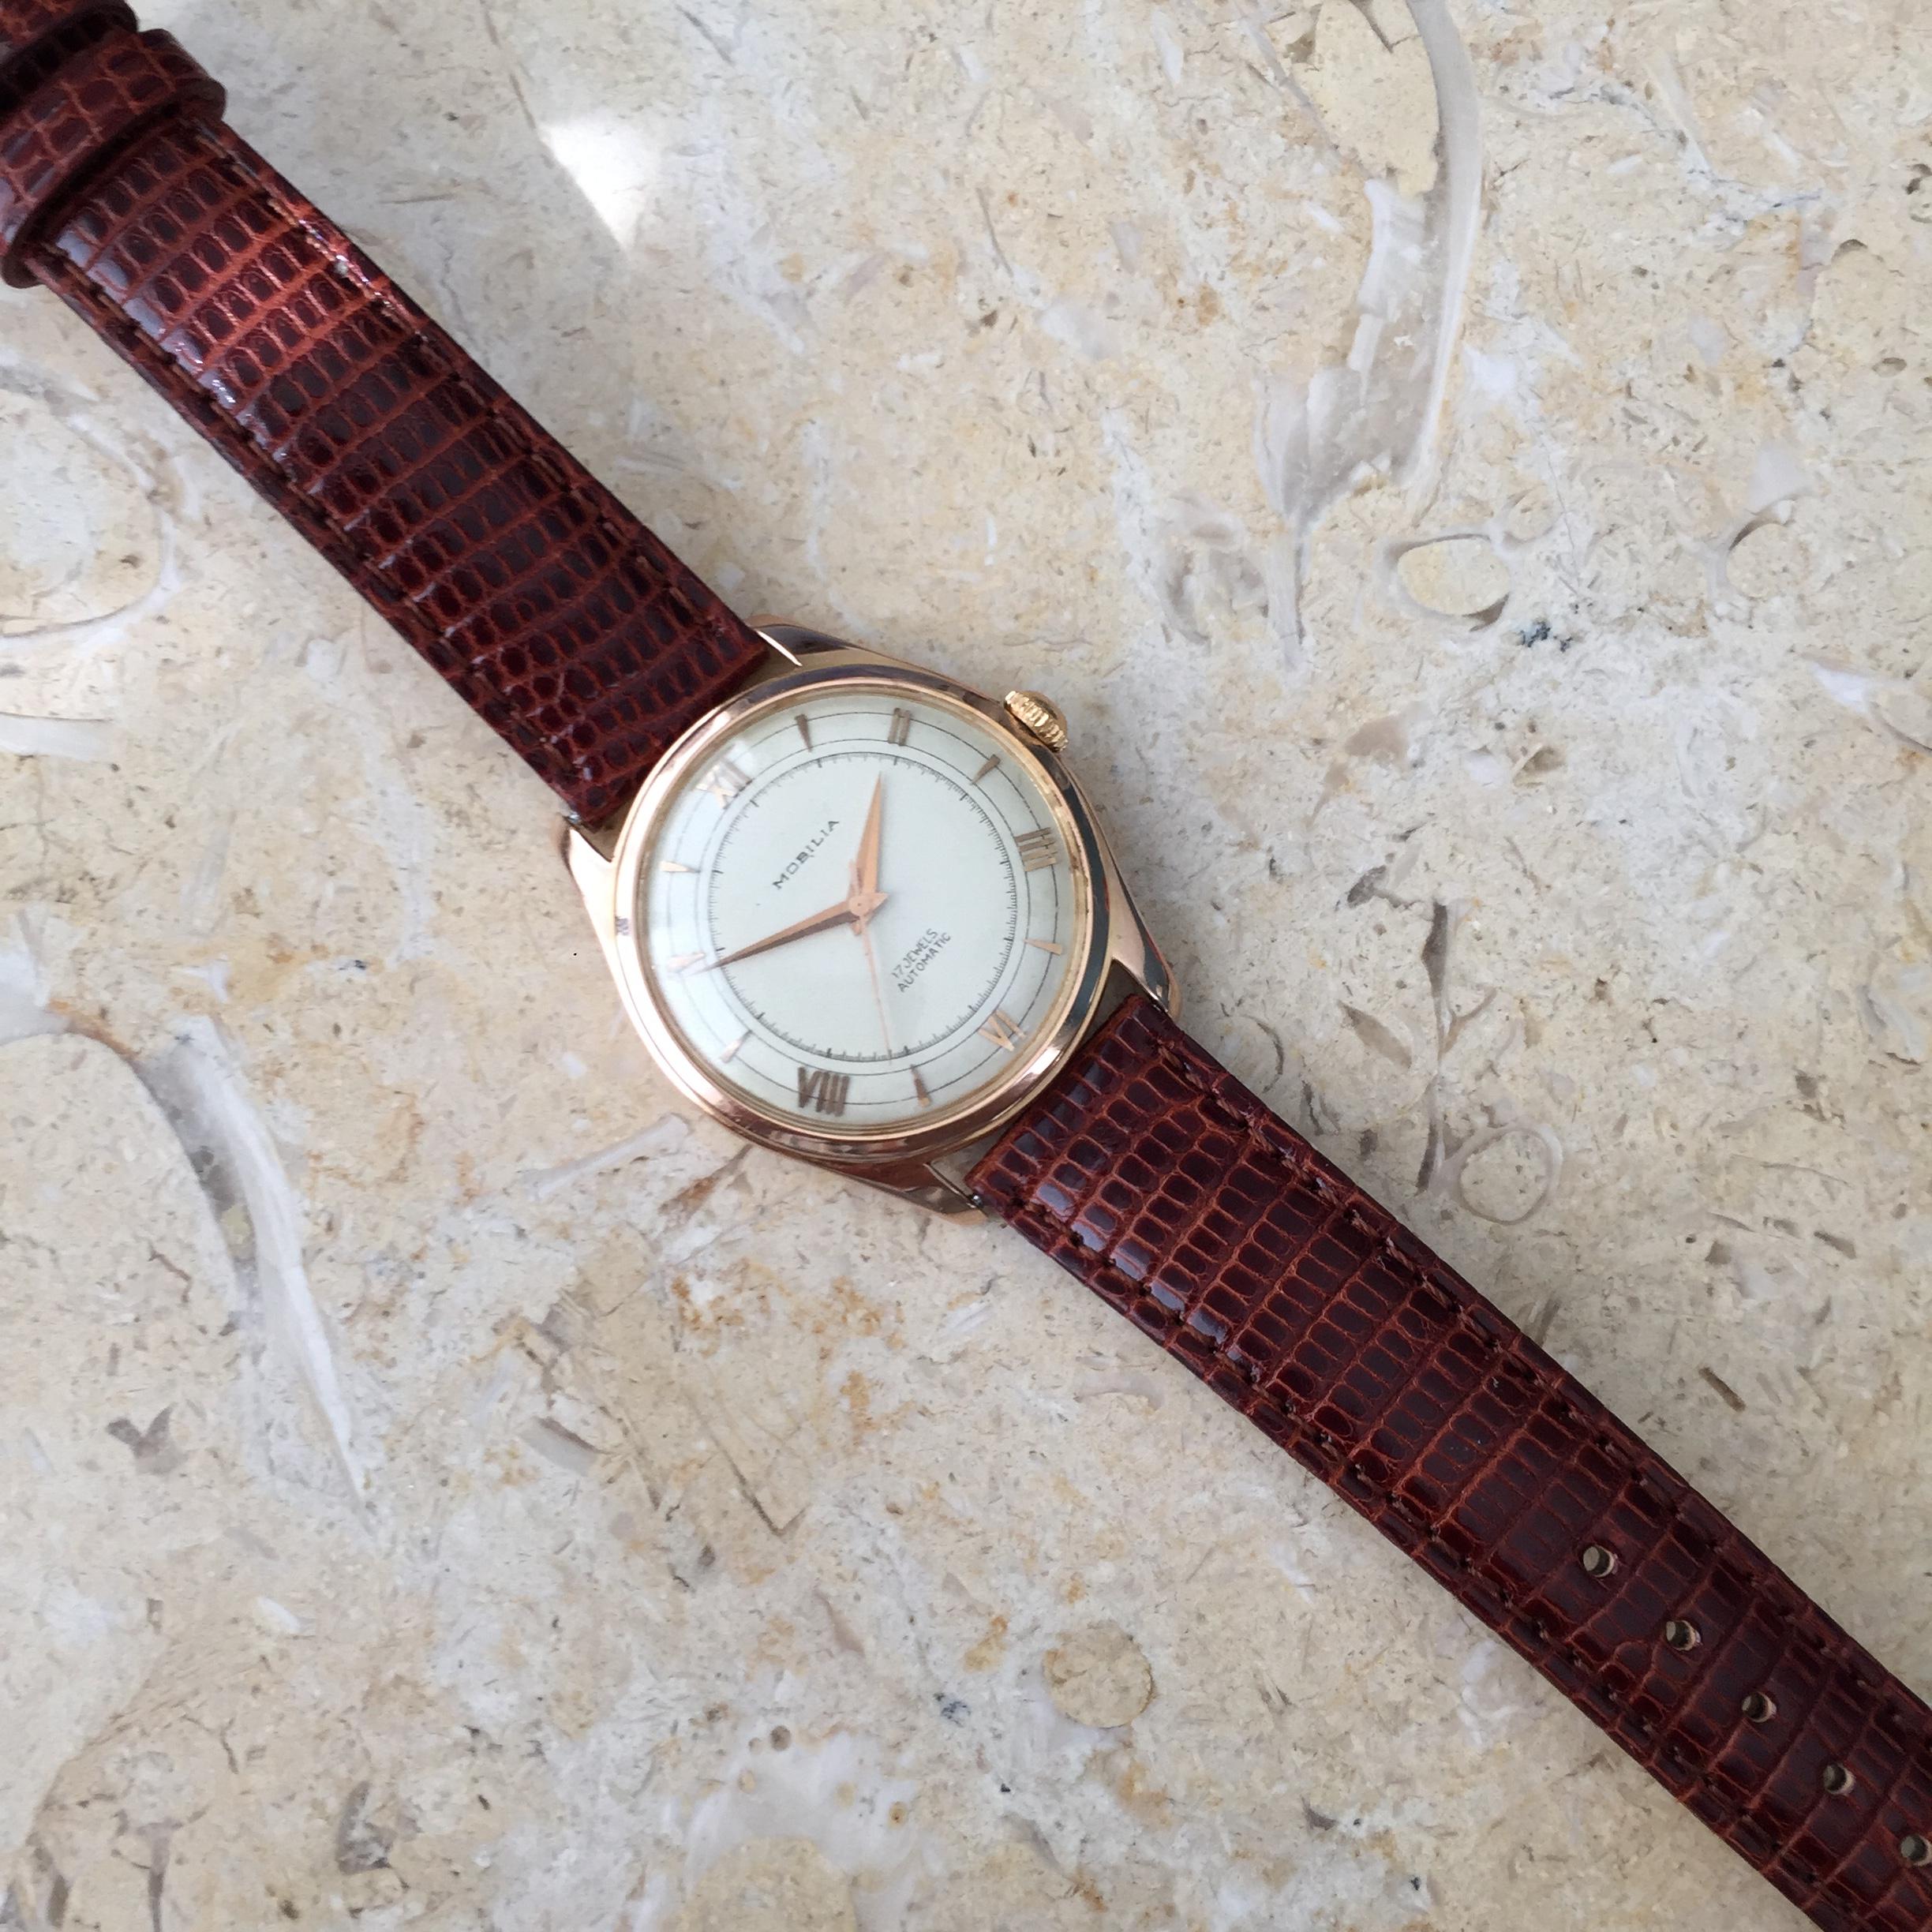 Mobilia] Can anyone tell me anything about this brand? : r/Watches